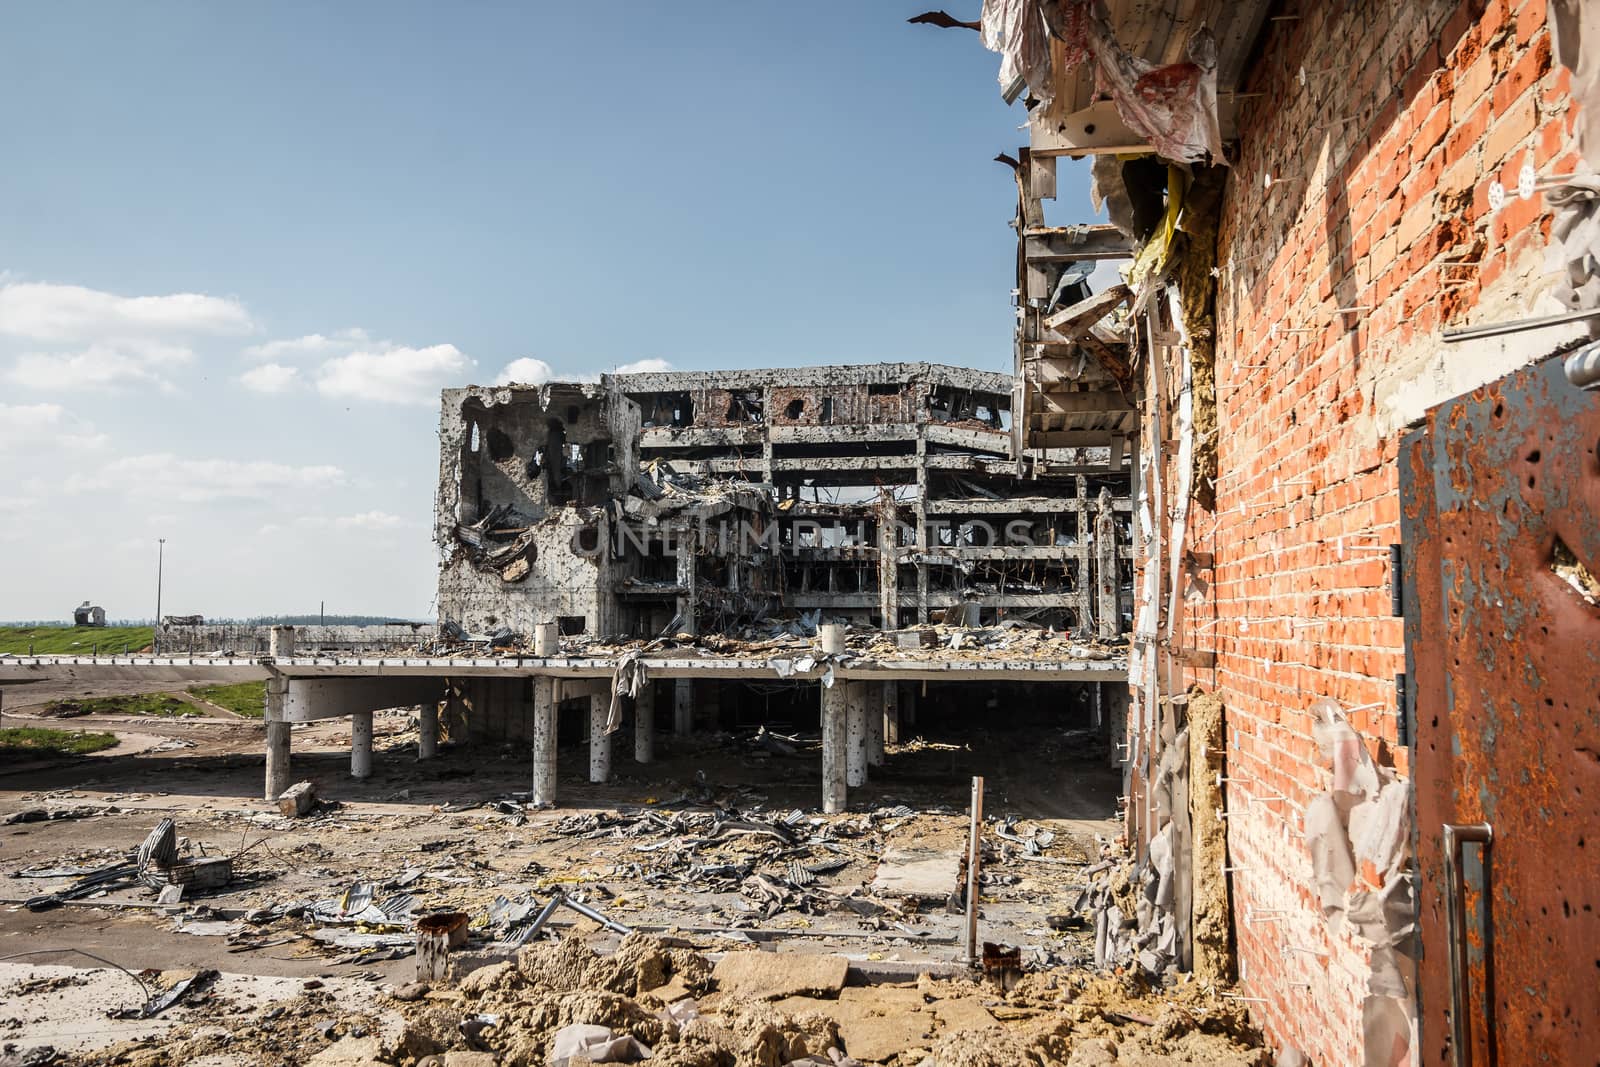 Wide Angle view of donetsk airport ruins after massive artillery shelling